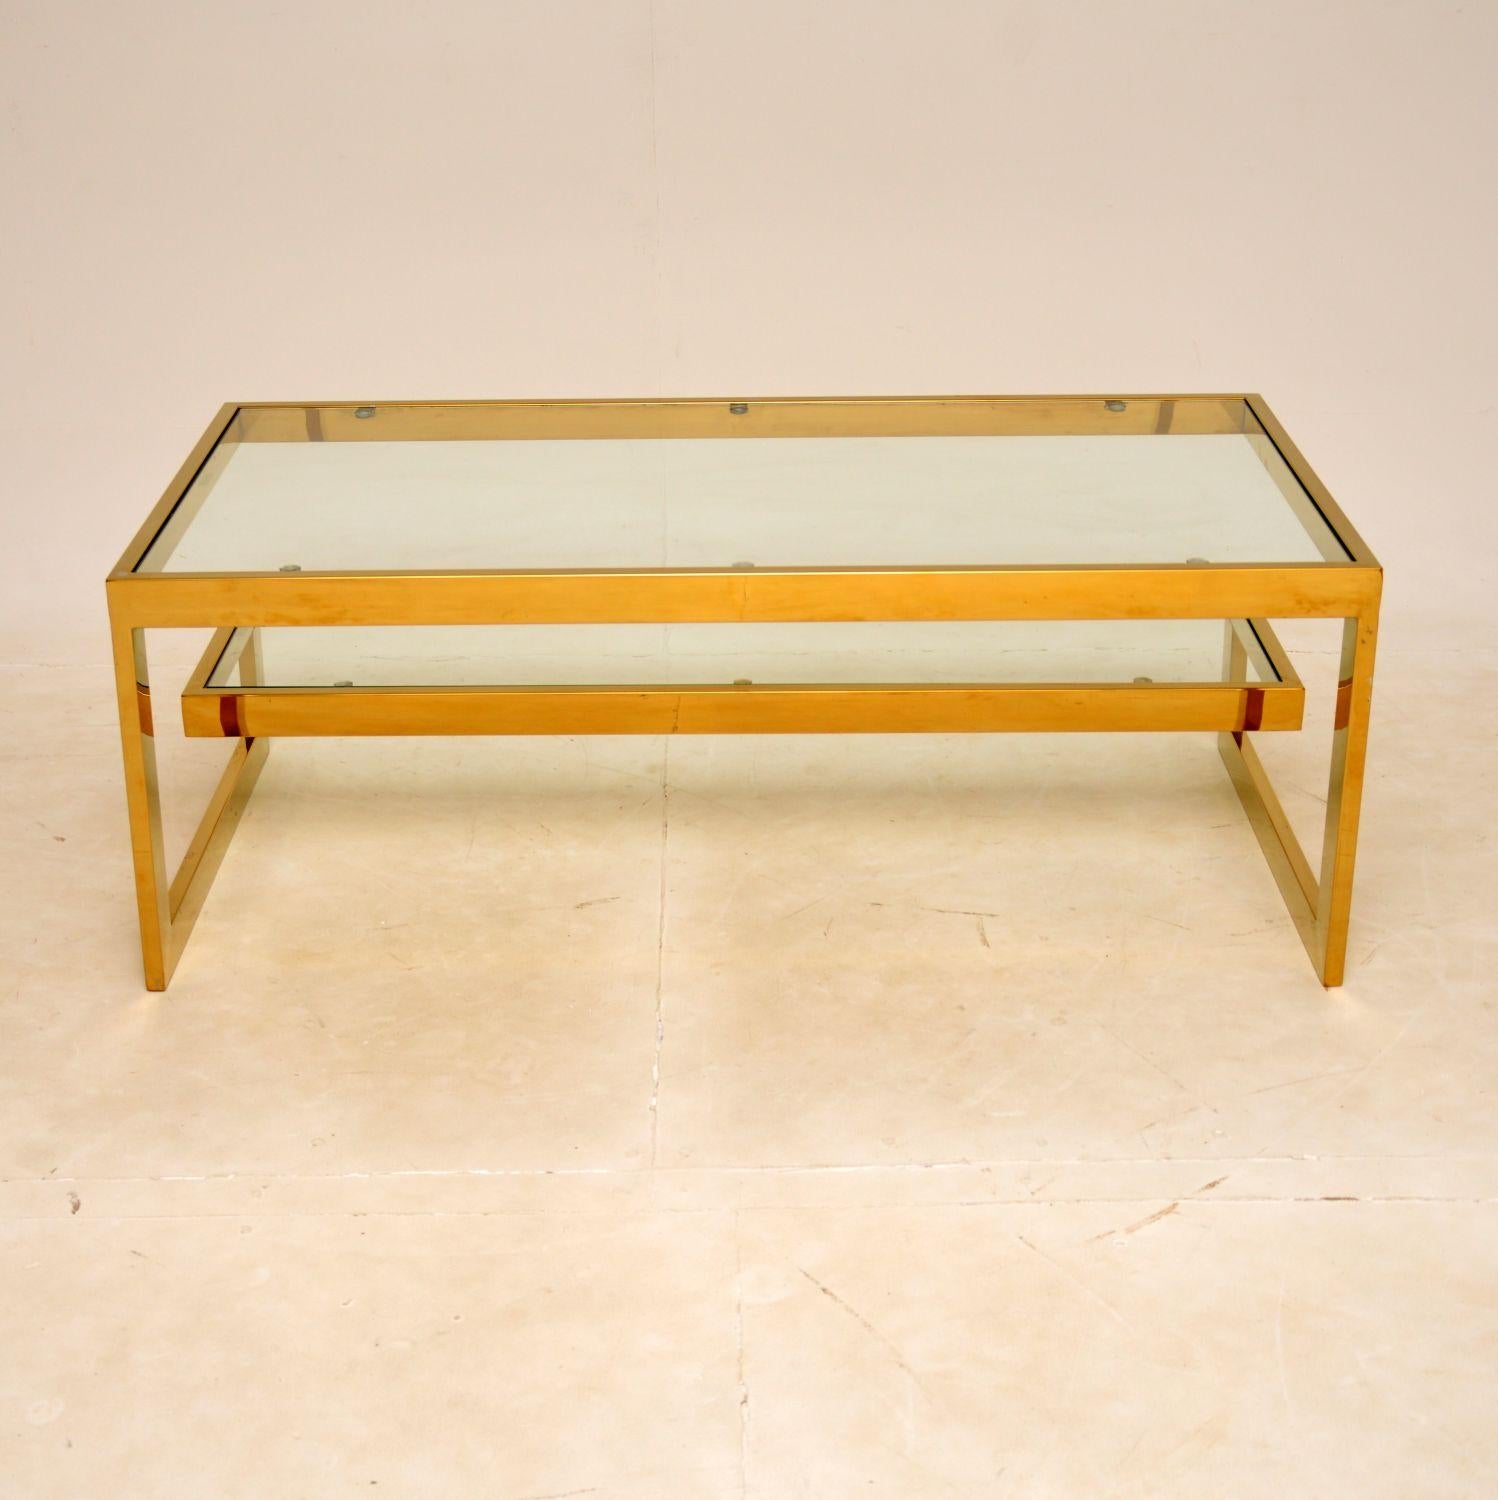 1970s Vintage Gold Plated Coffee Table In Good Condition For Sale In London, GB